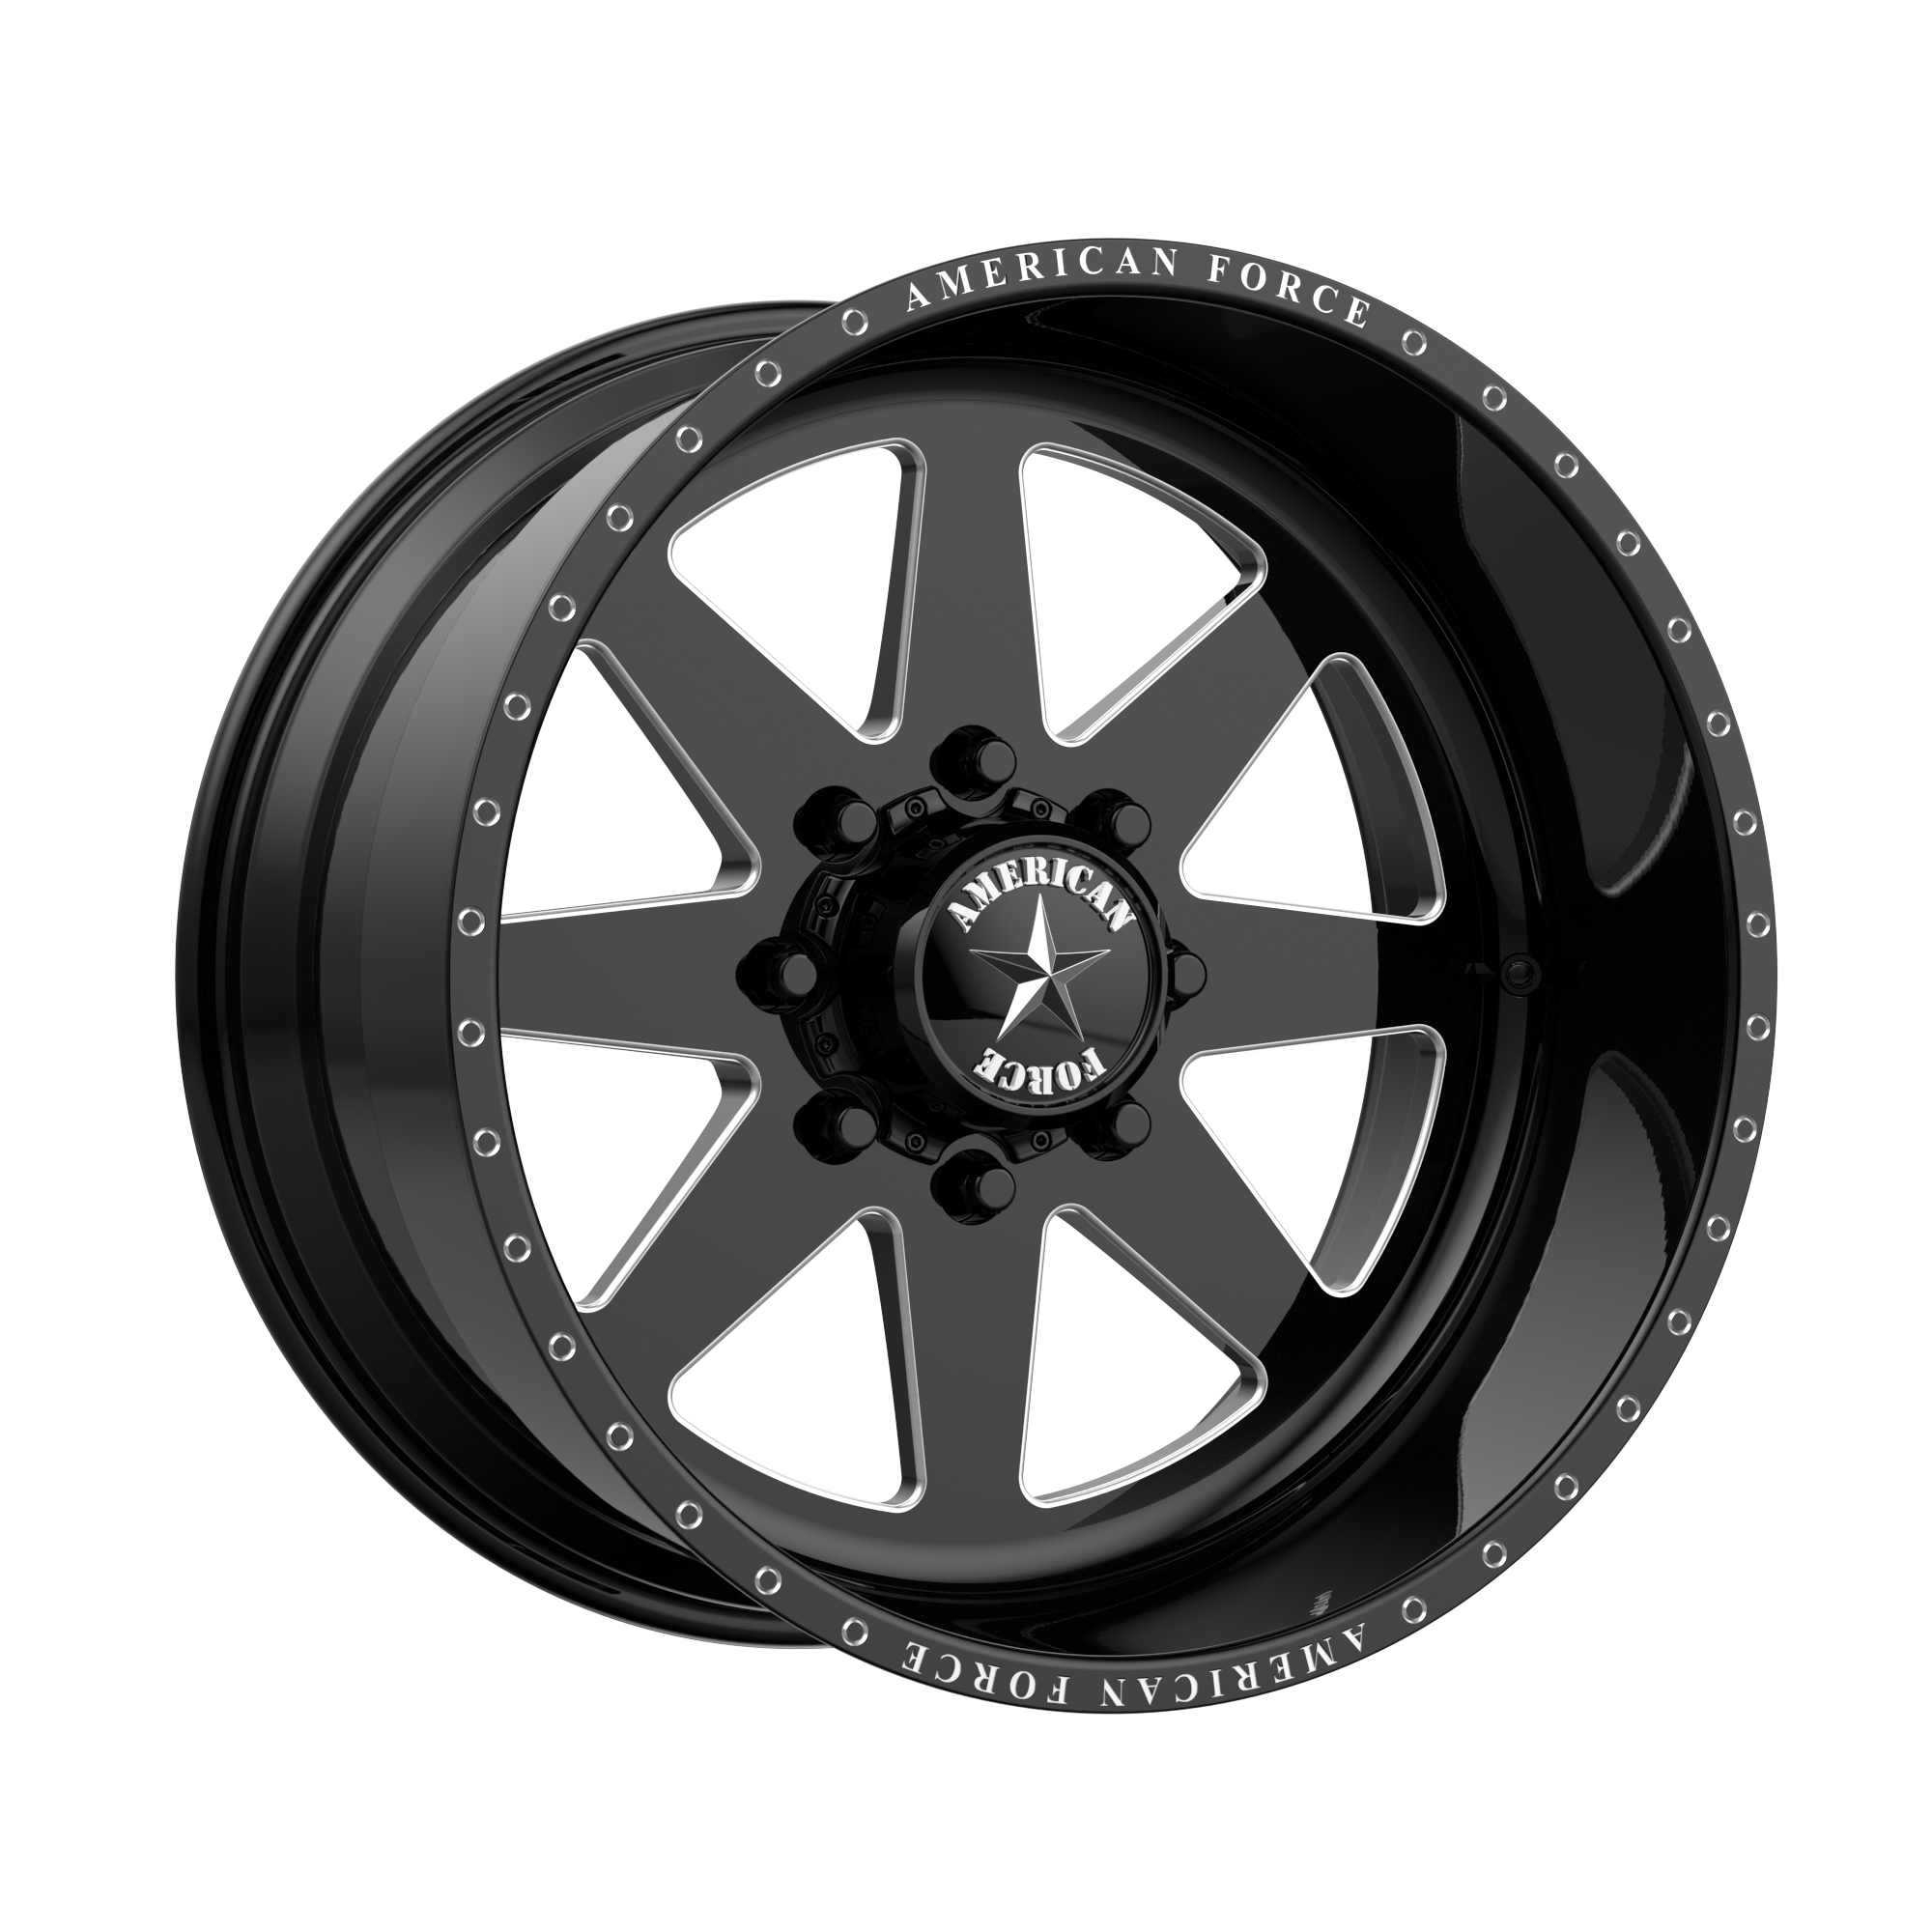 INDEPENDENCE SS 26x14 6x135.00 GLOSS BLACK MACHINED (-73 mm) - Tires and Engine Performance